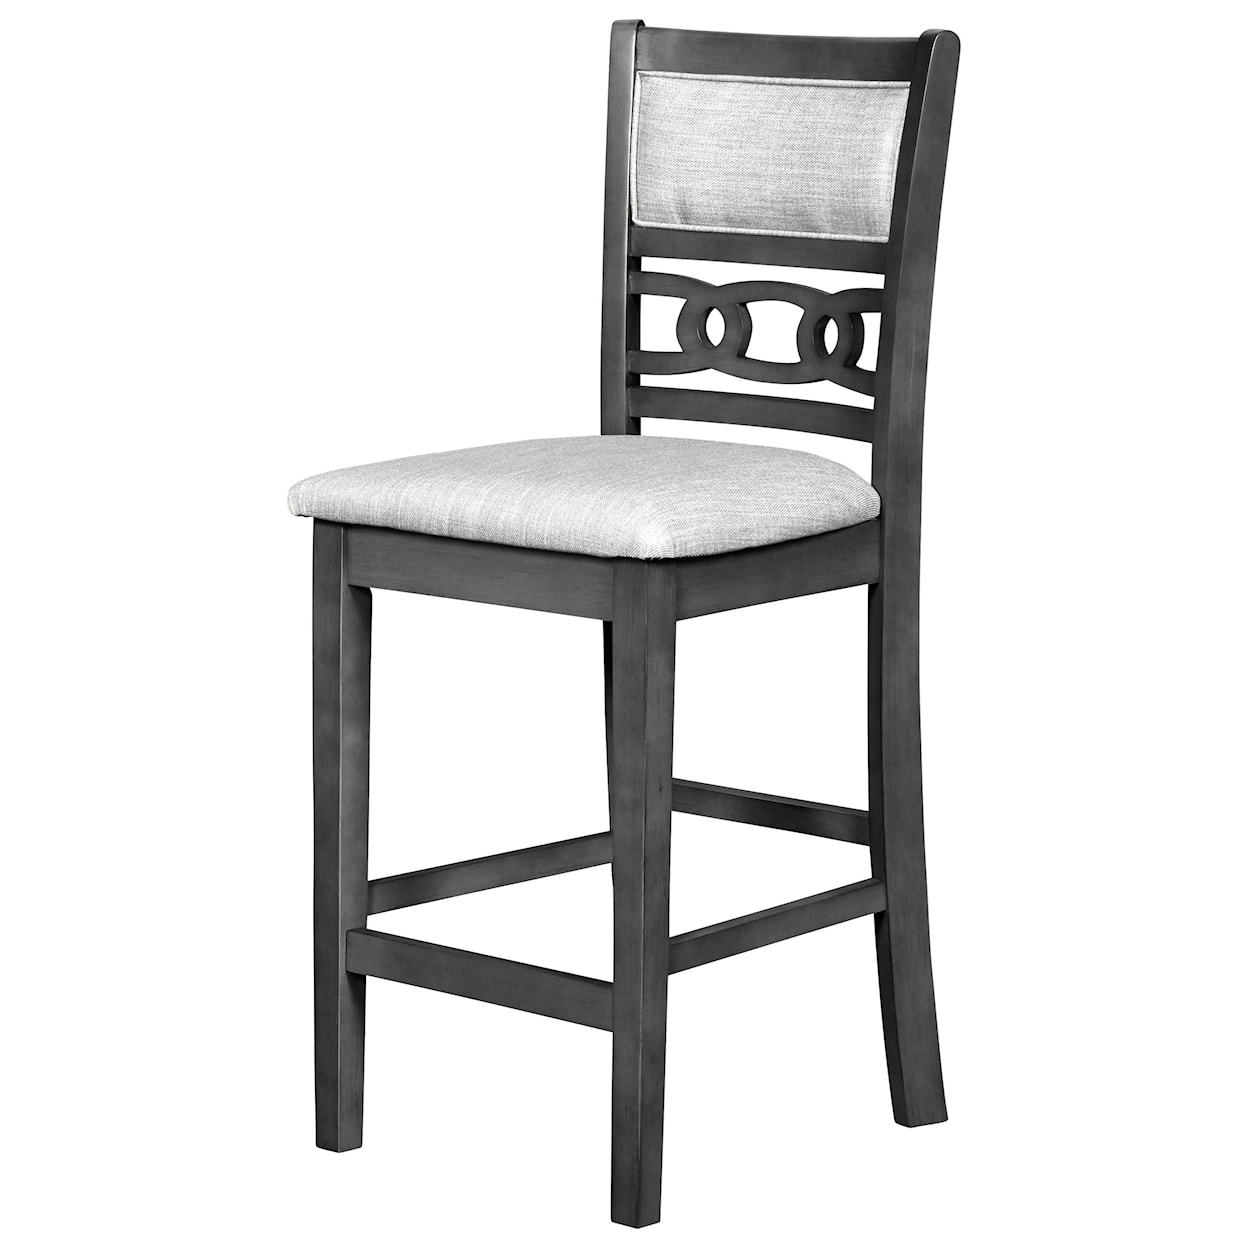 New Classic Furniture Gia Counter Height Dining Table and Chair Set